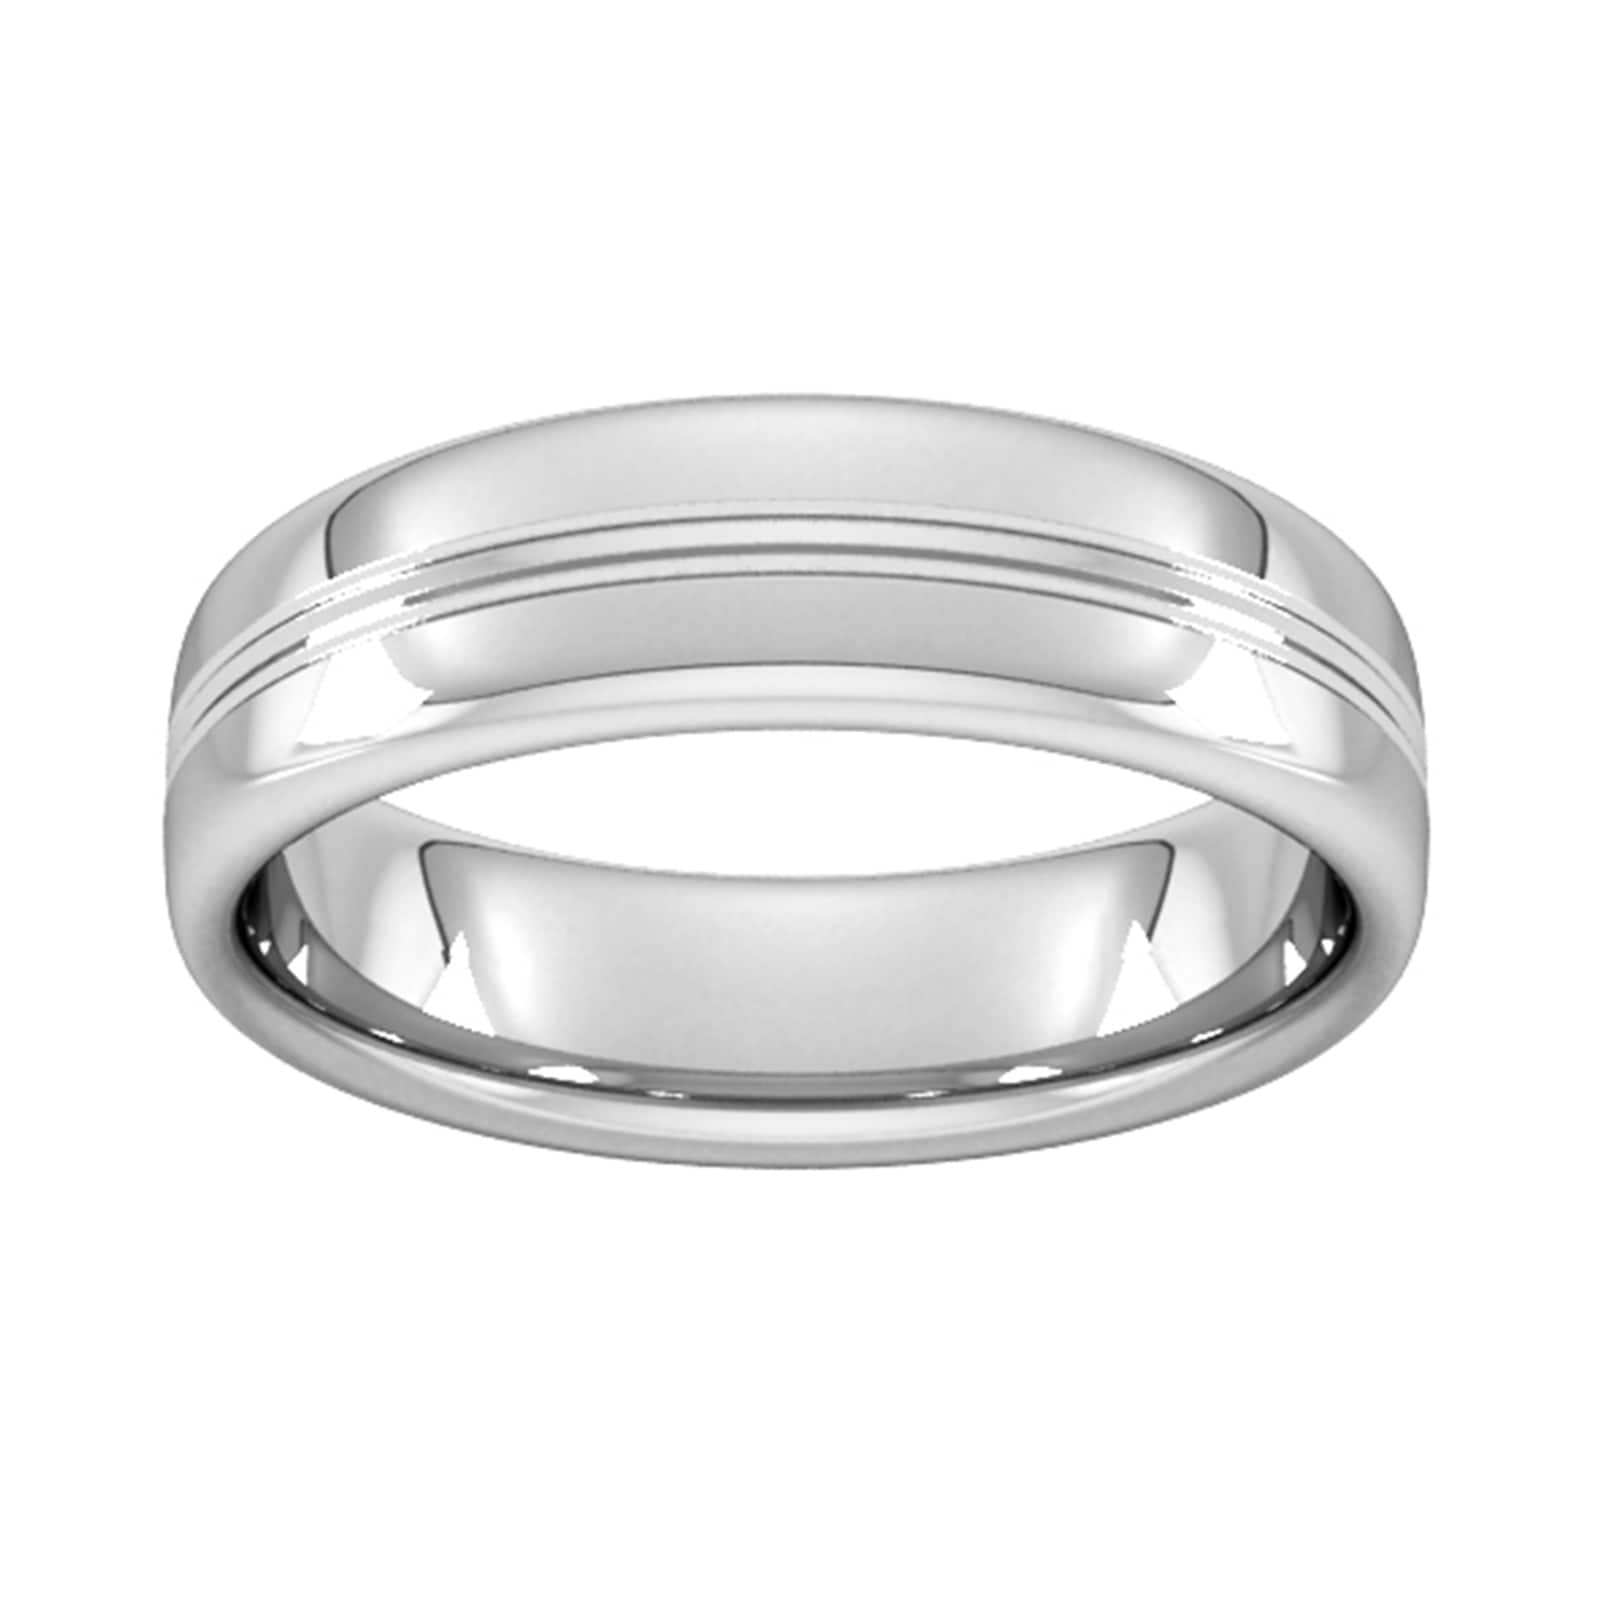 6mm Slight Court Standard Grooved Polished Finish Wedding Ring In 18 Carat White Gold - Ring Size L